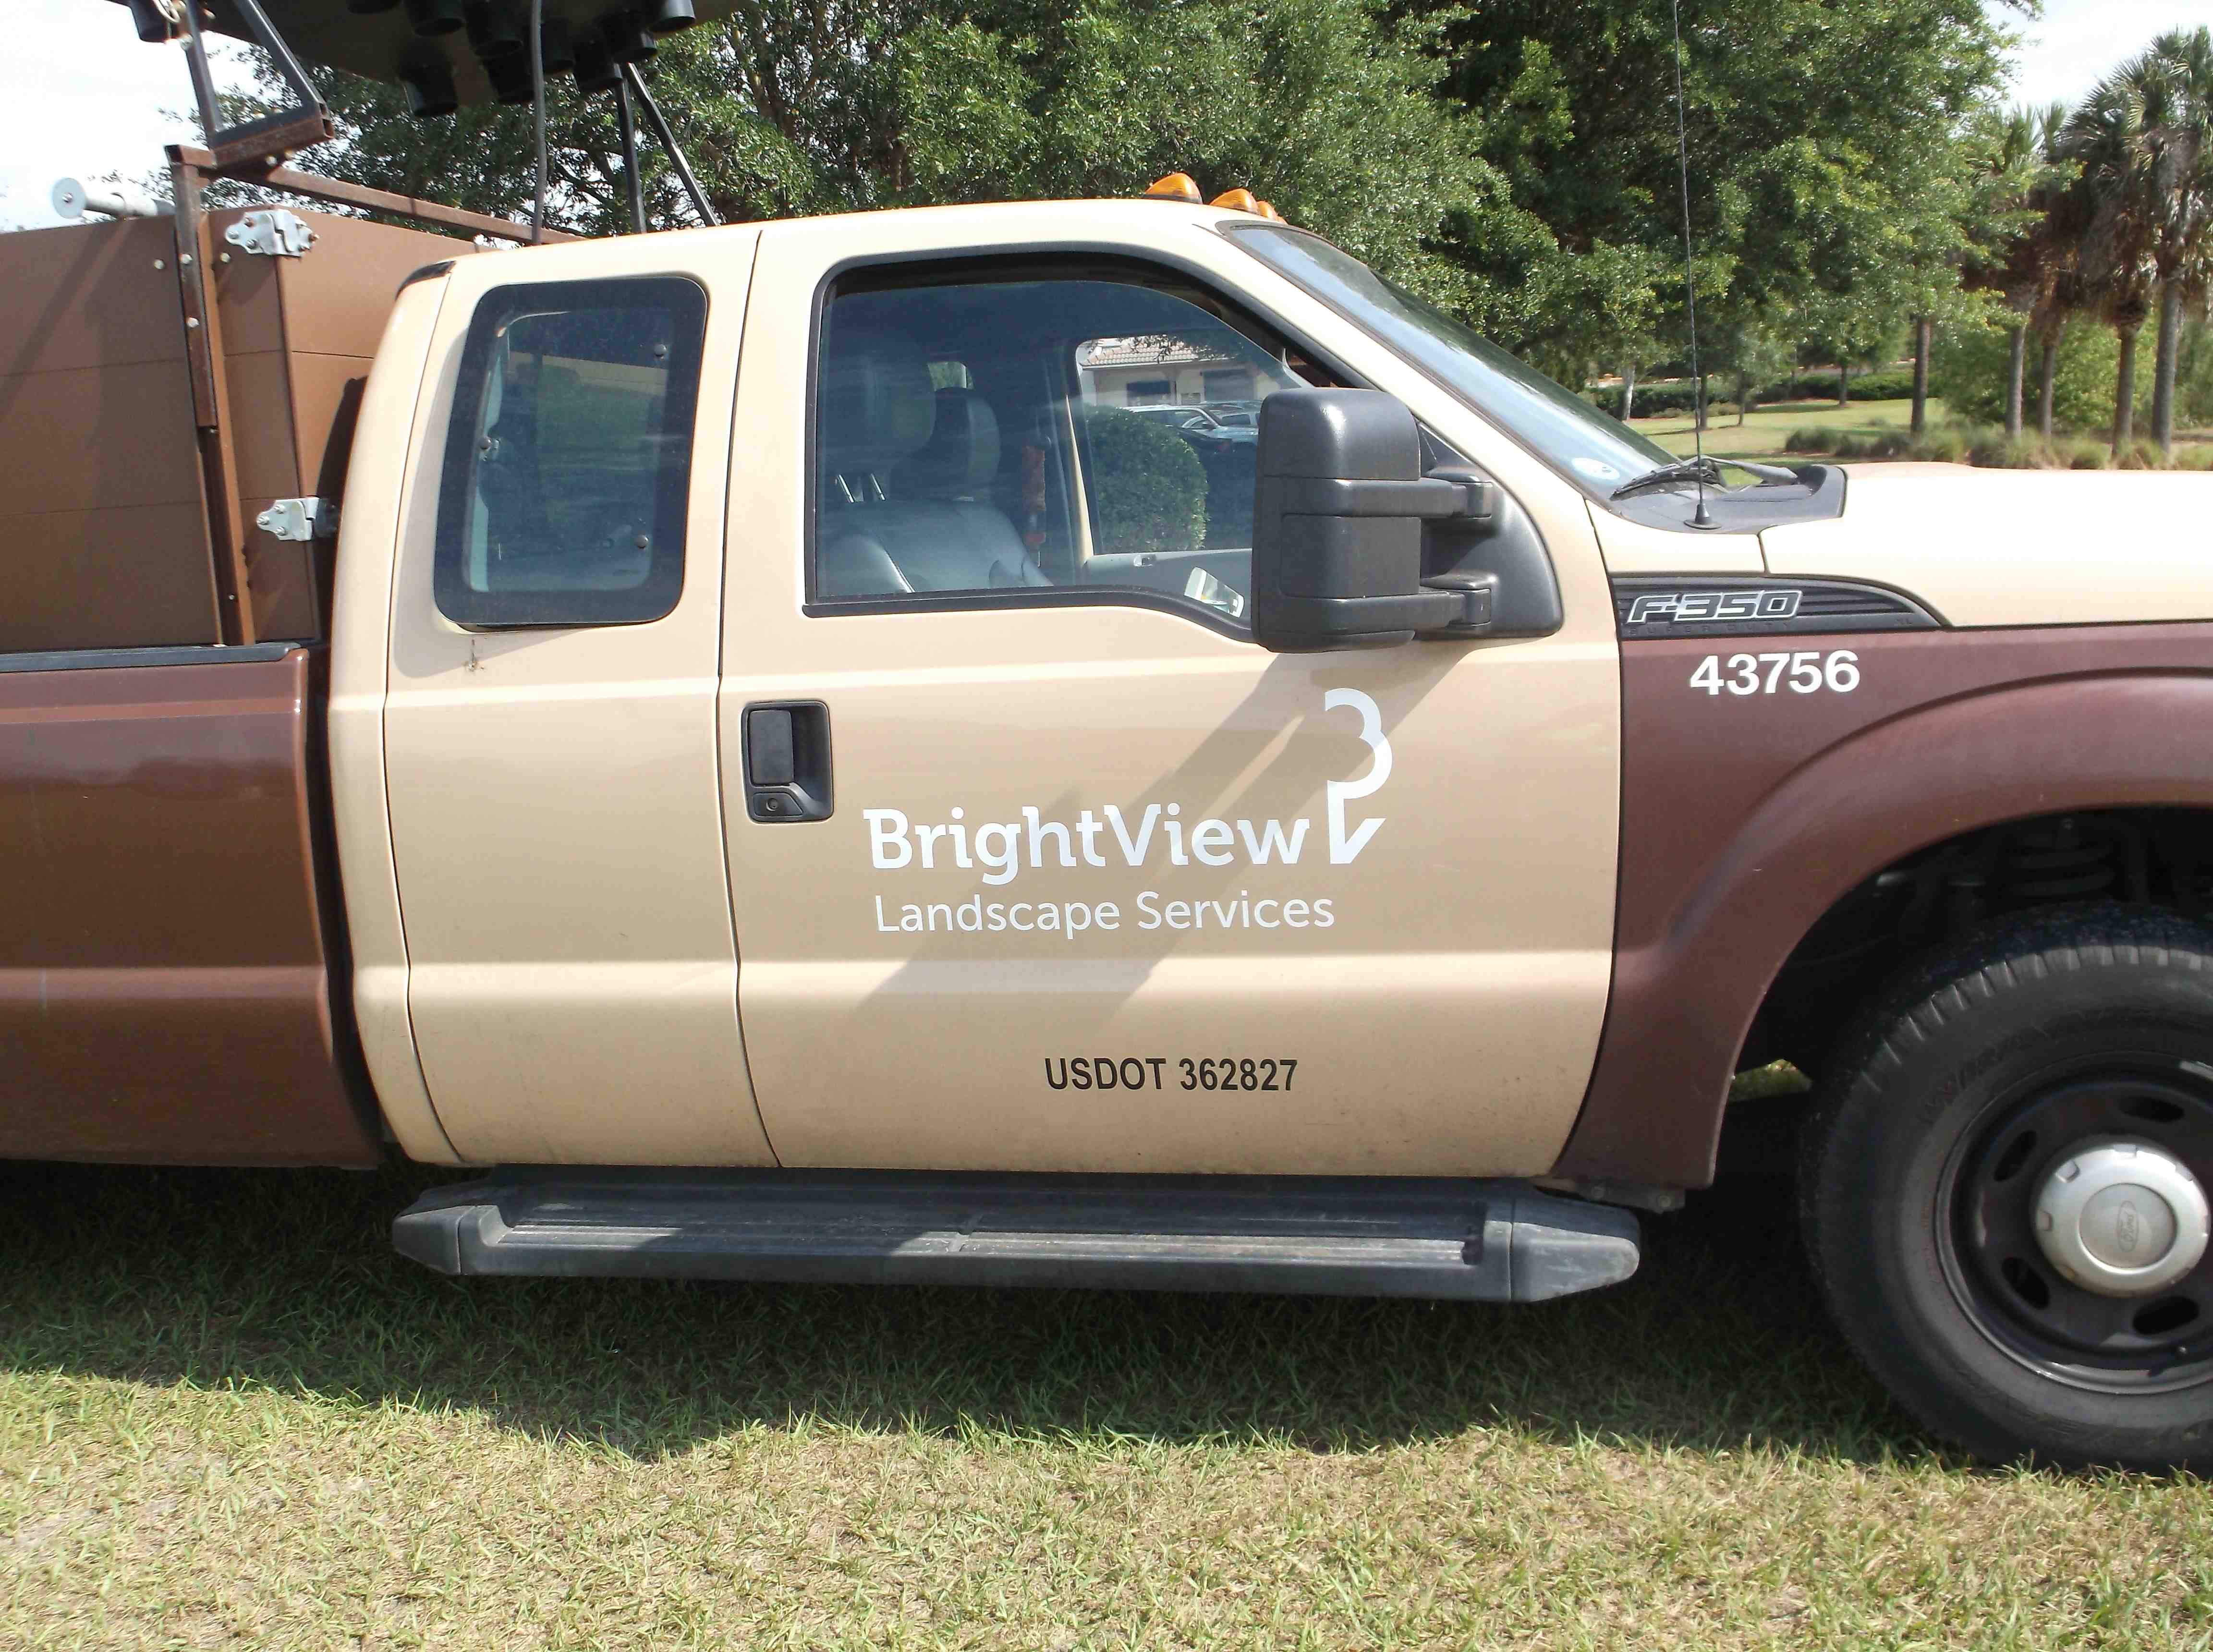 Merger Of Landscaping Powerhouses More, Brightview Landscape Services